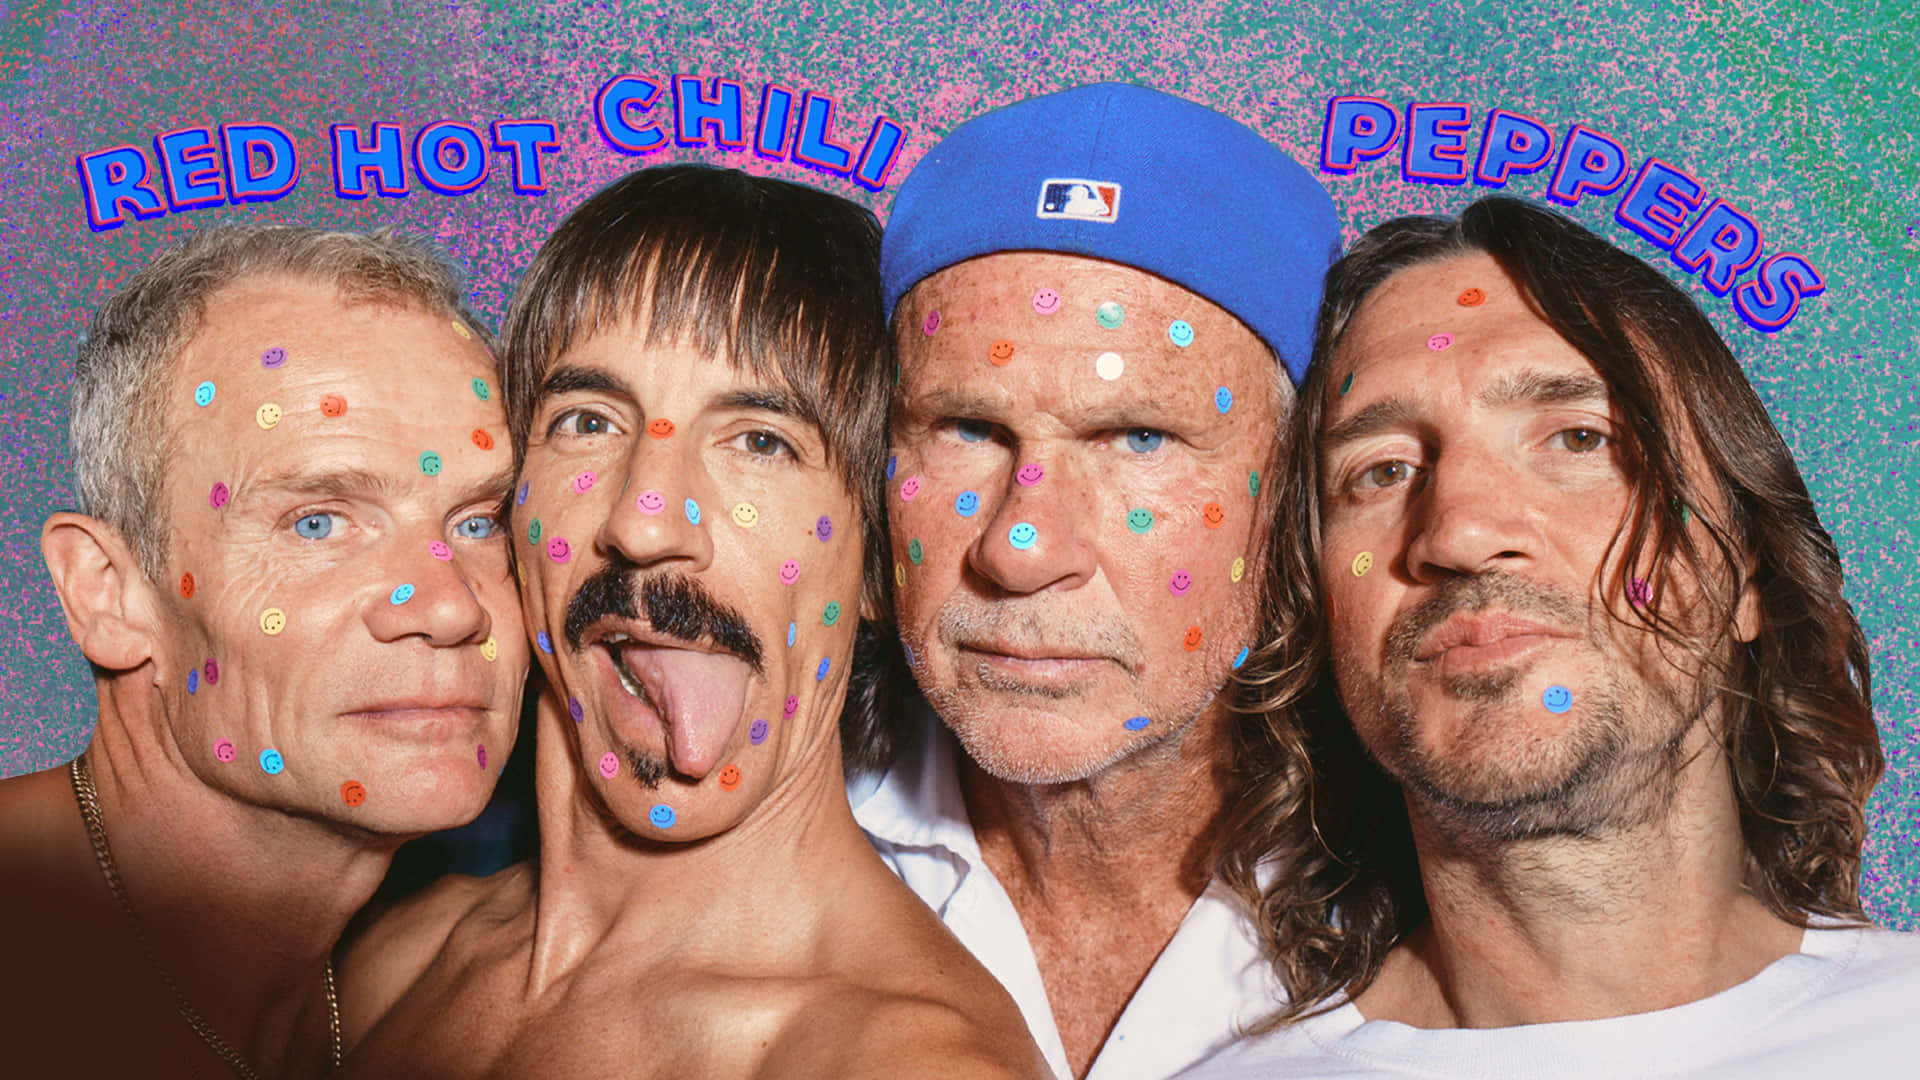 Roteheiße Chili Peppers - Werbung Wallpaper